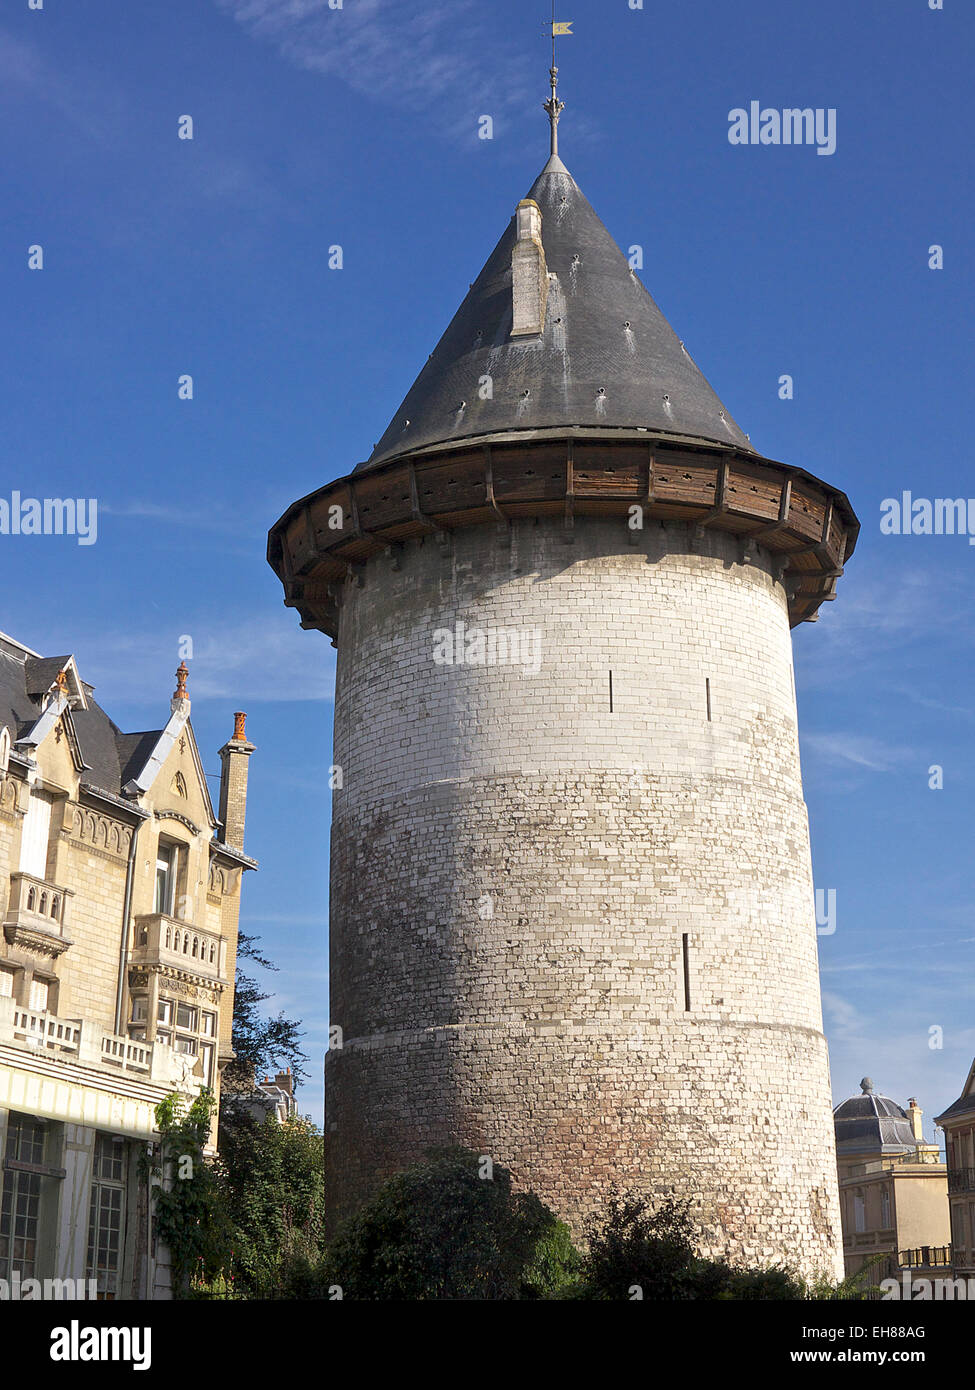 Joan of Arc Tower dating from the 13th century, Rouen, Normandy, France, Europe Stock Photo